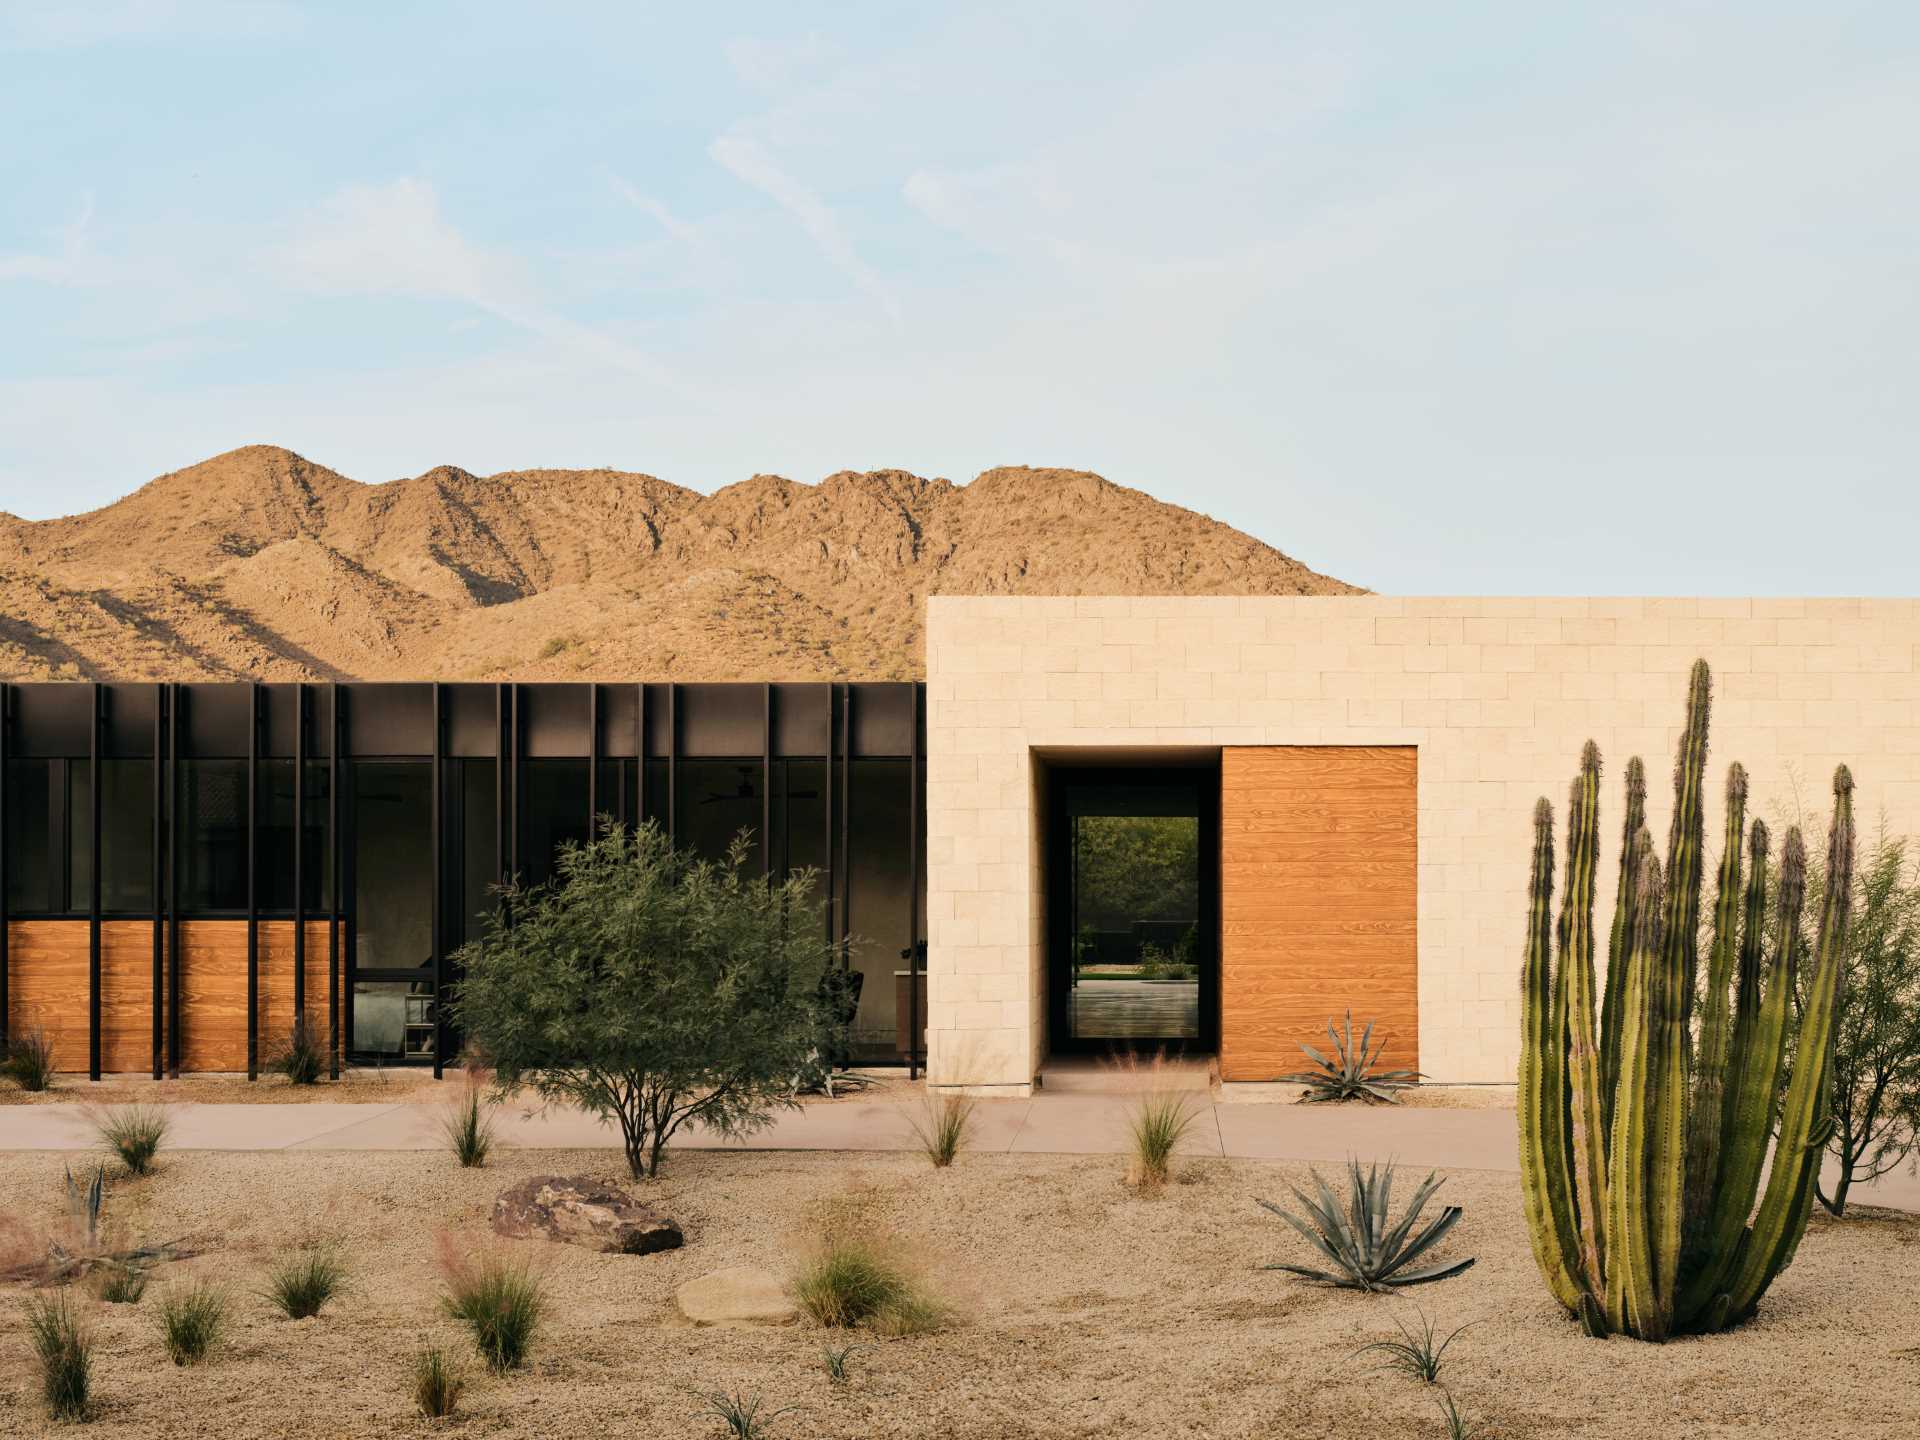 As you approach this modern desert house, the first thing that captures the eye is the striking interplay of metal fins that adorn the exterior, that were inspired by Ocotillo plants.